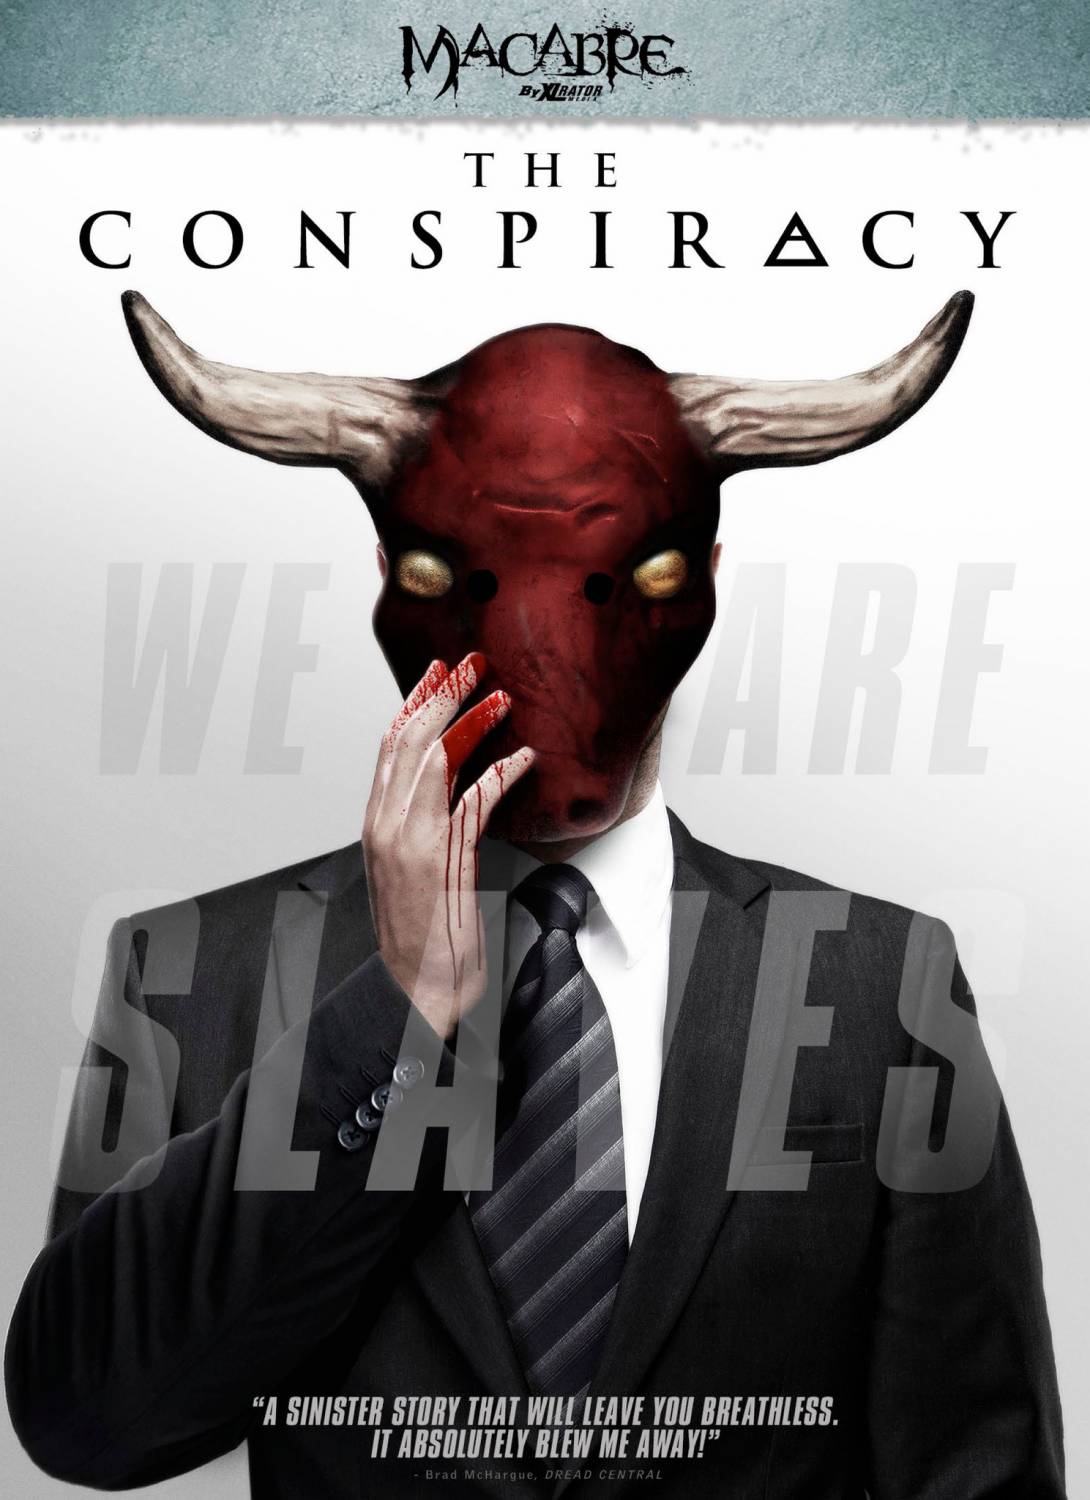 The Conspiracy (2012) 